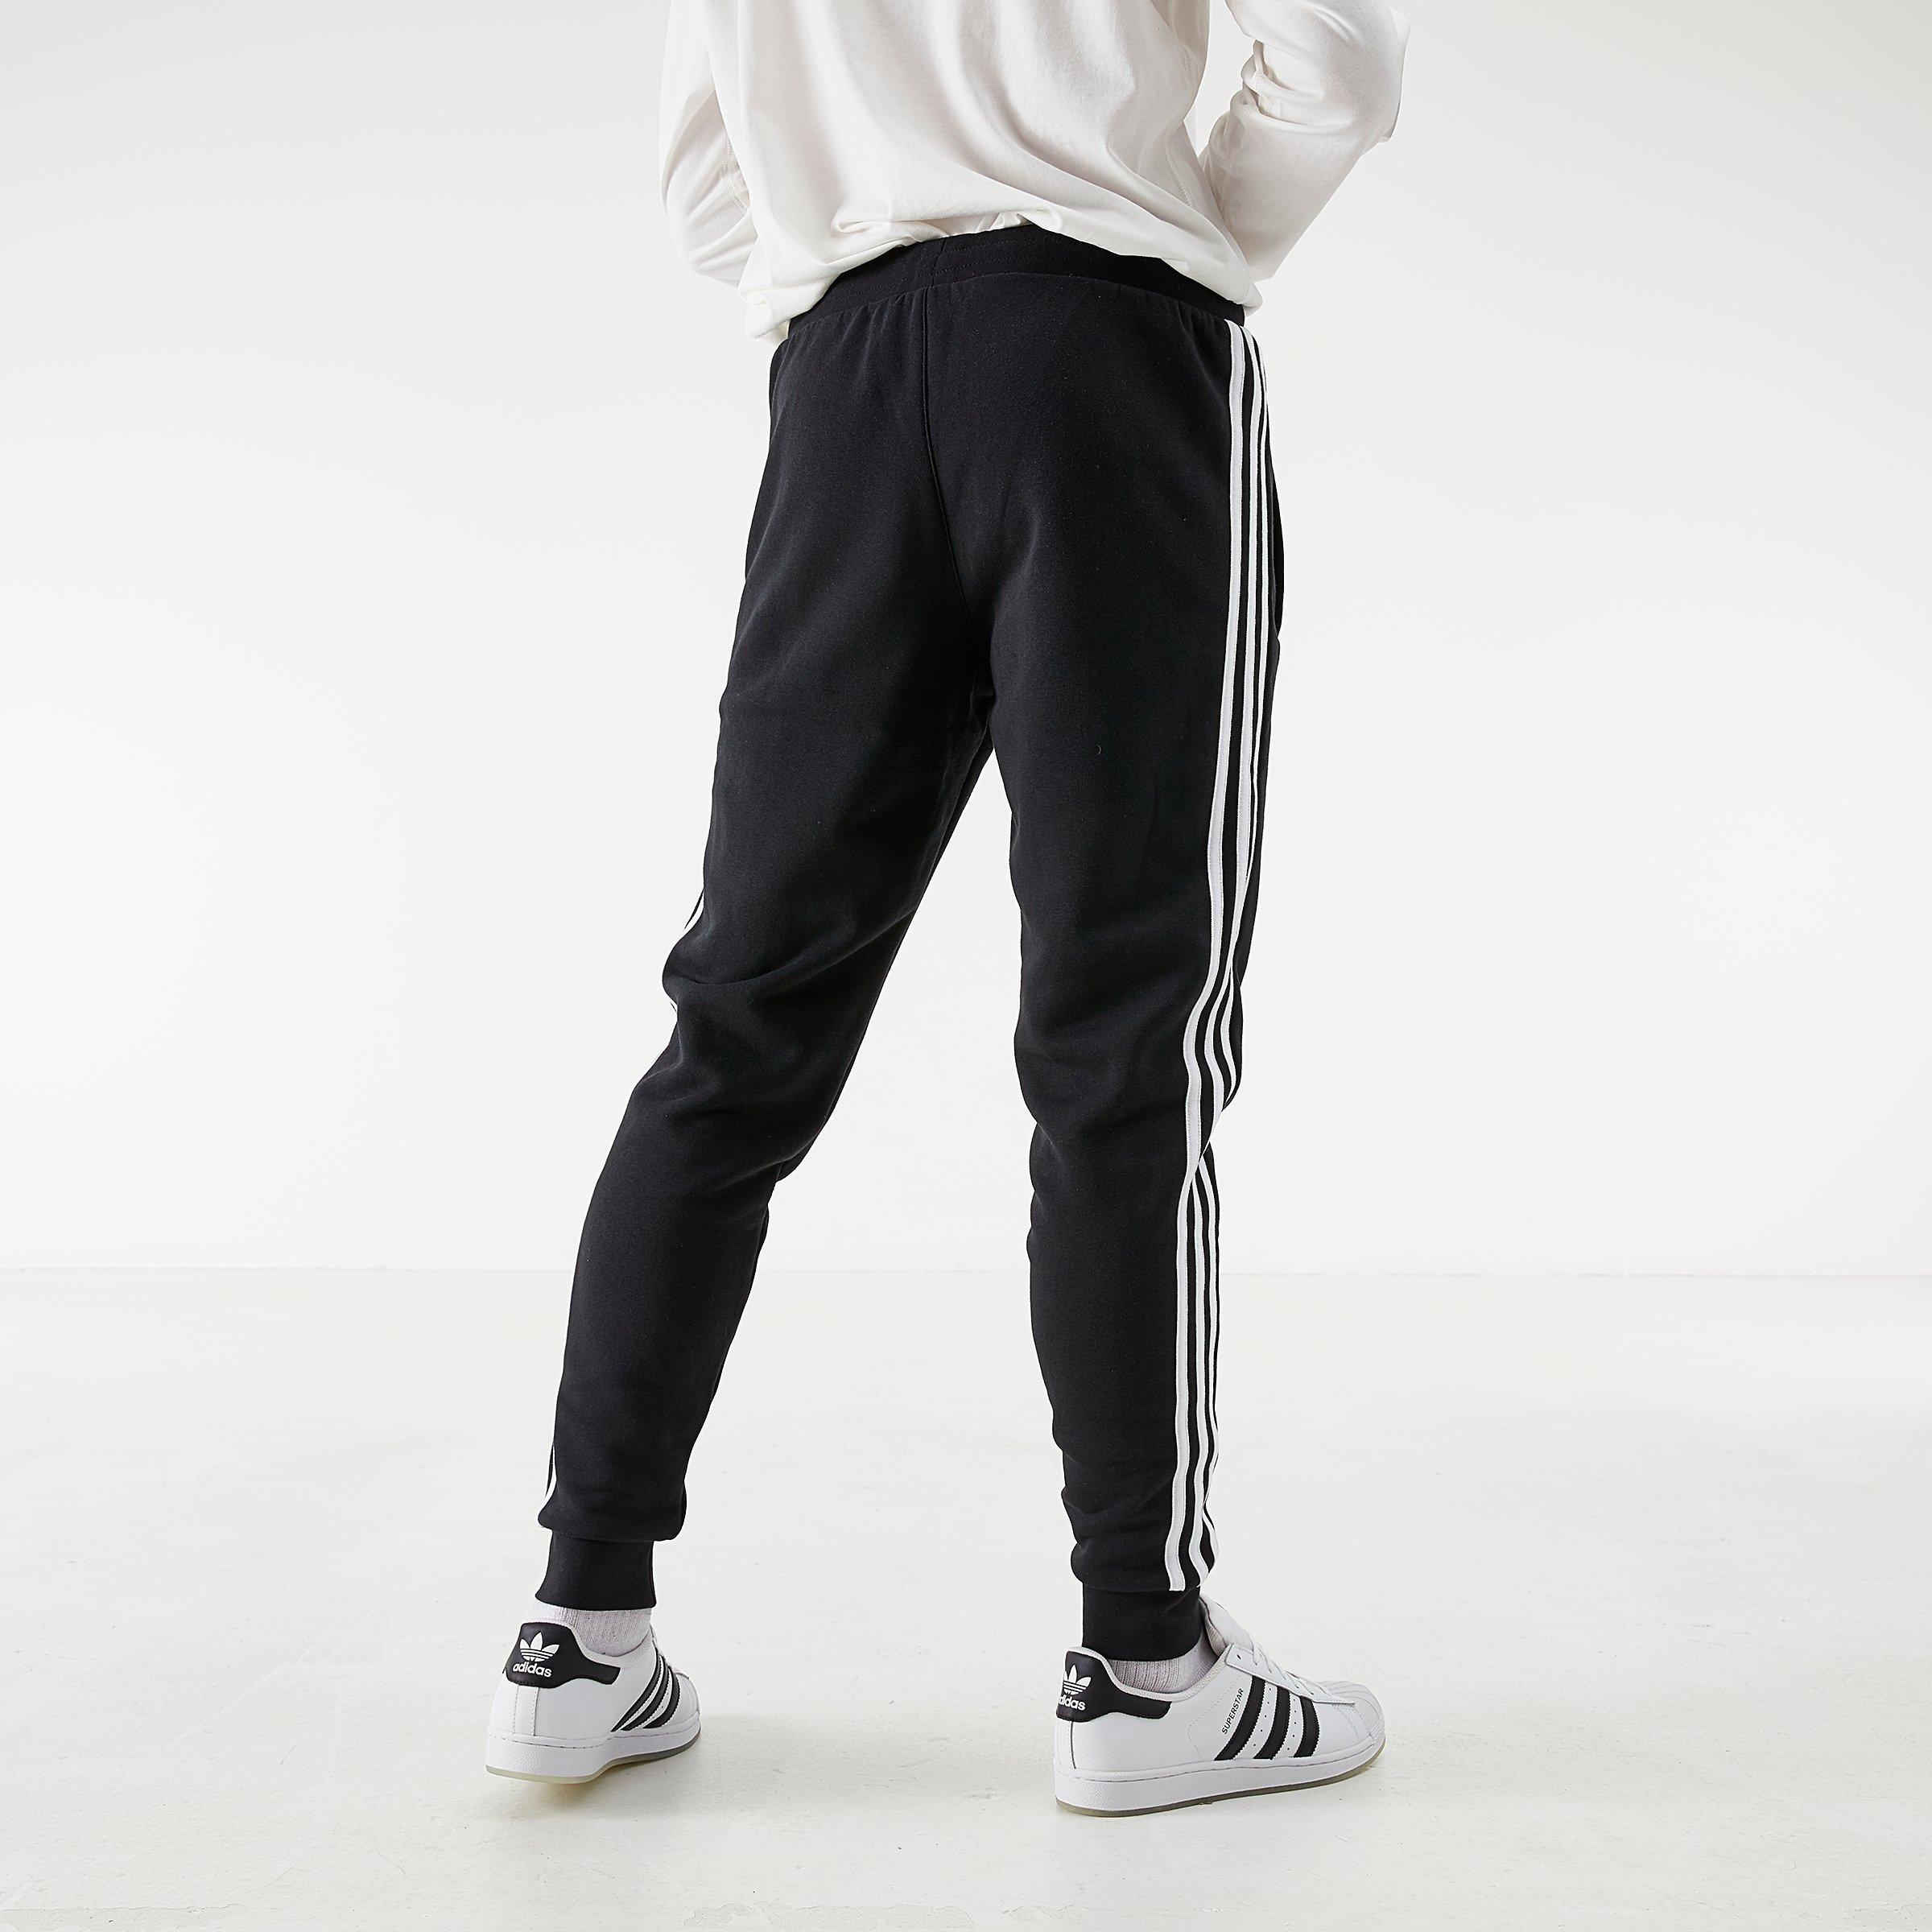 adidas pants with stripe on back